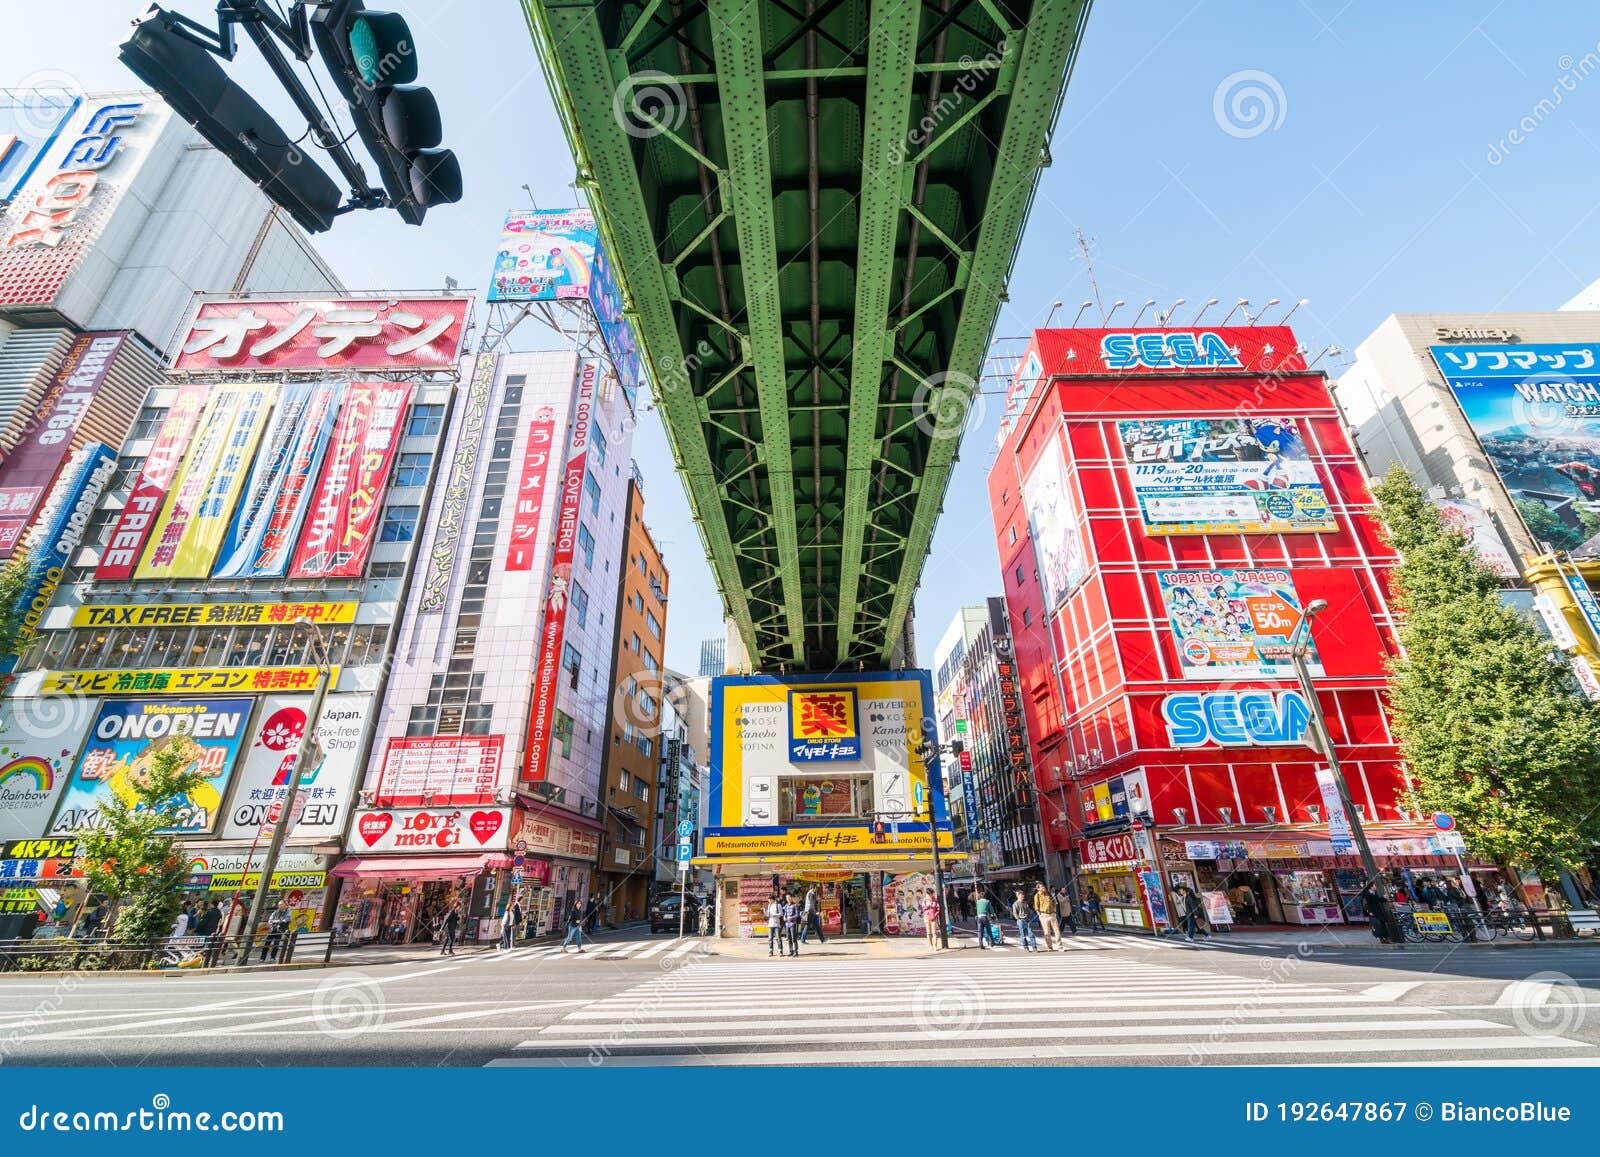 Akihabara Electric Town in Tokyo Editorial Photography - Image of otaku,  architecture: 192647867